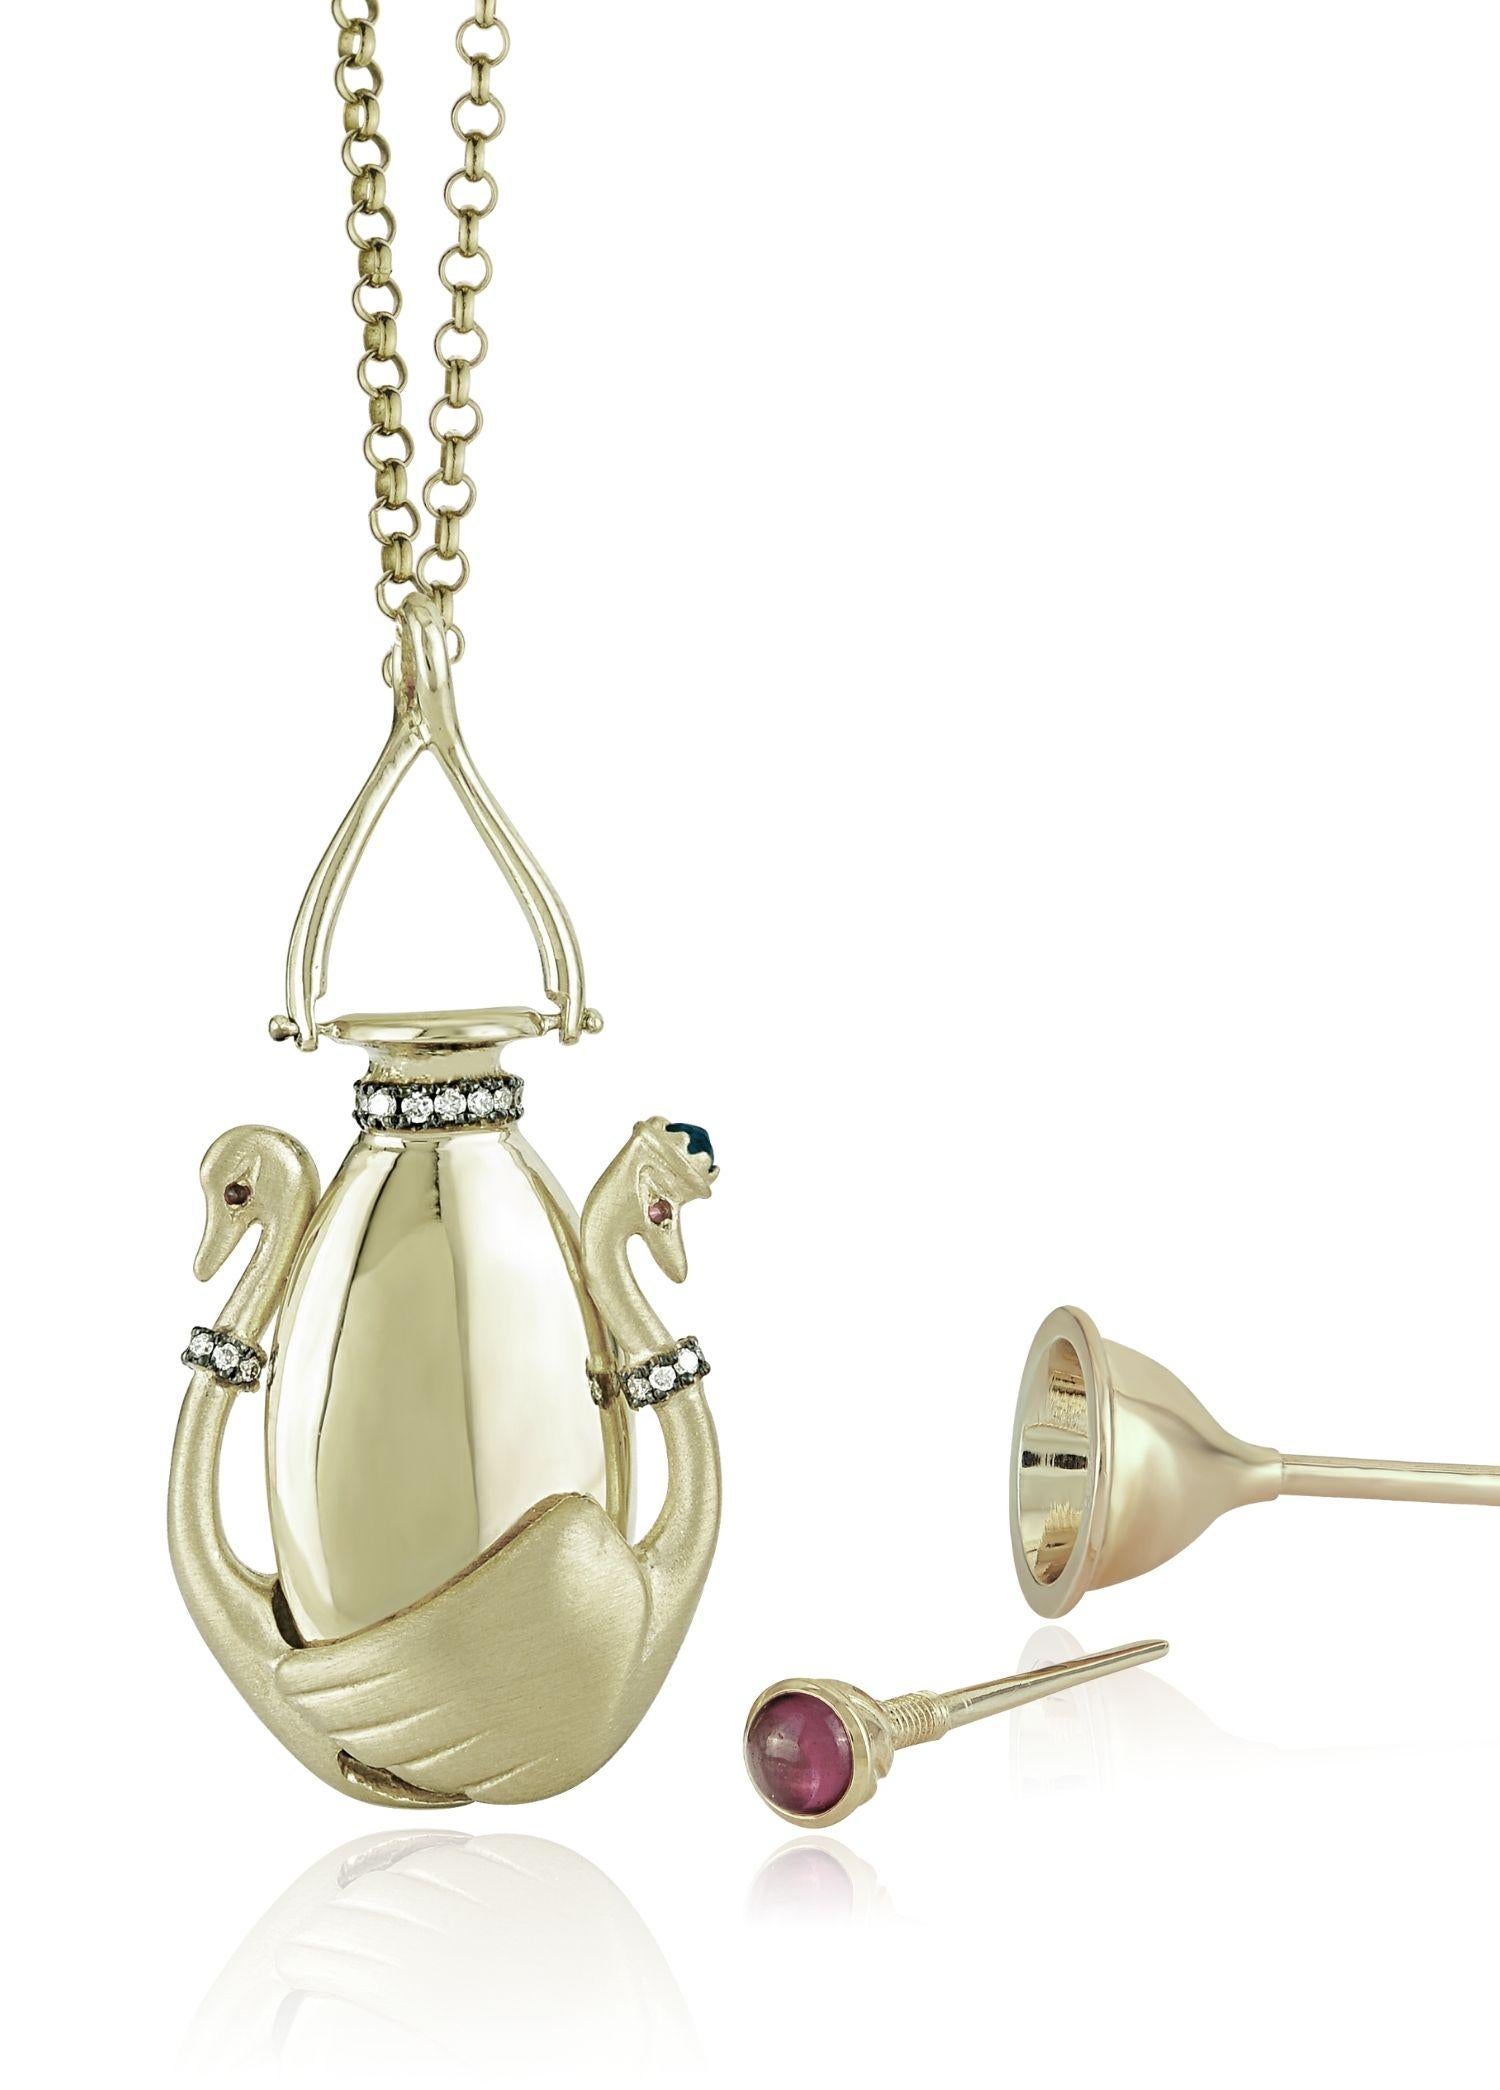 Swans in Love Perfume Bottle Necklace

18K Yellow Gold, 0.14 ct White Diamond, 0.07 ct Blue Sapphire, 0.03 ct Ruby, 0,65 ct Rhodolite
Perfume Necklace comes with a gold 70cm chain & silver funnel.

The Story Behind
The male and female swans are